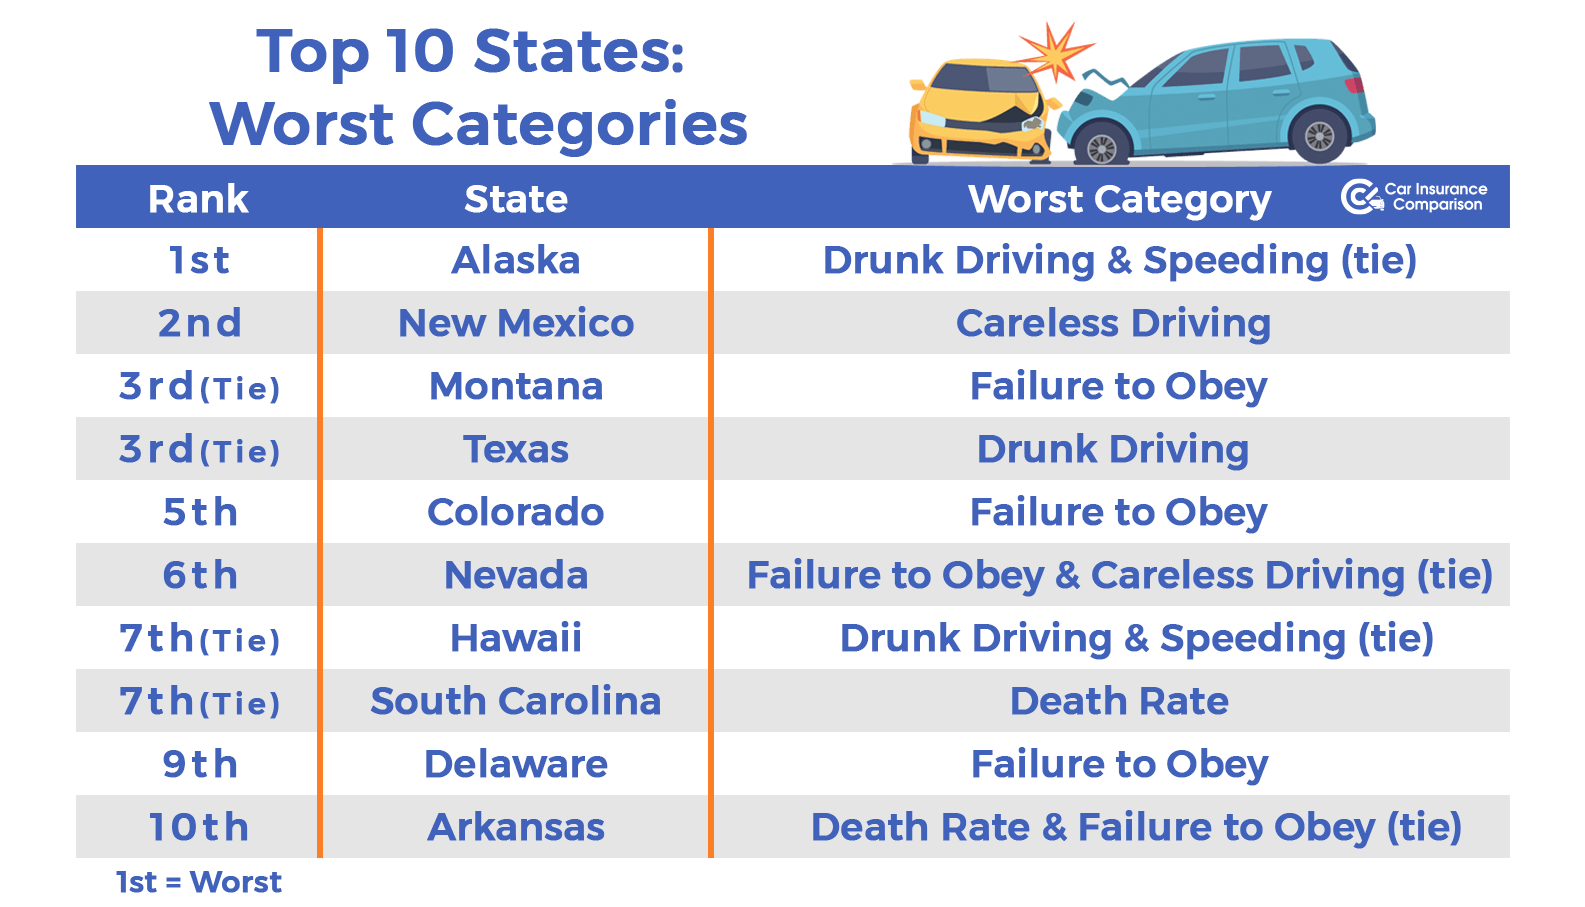 10 states with the worst drivers - worst categories